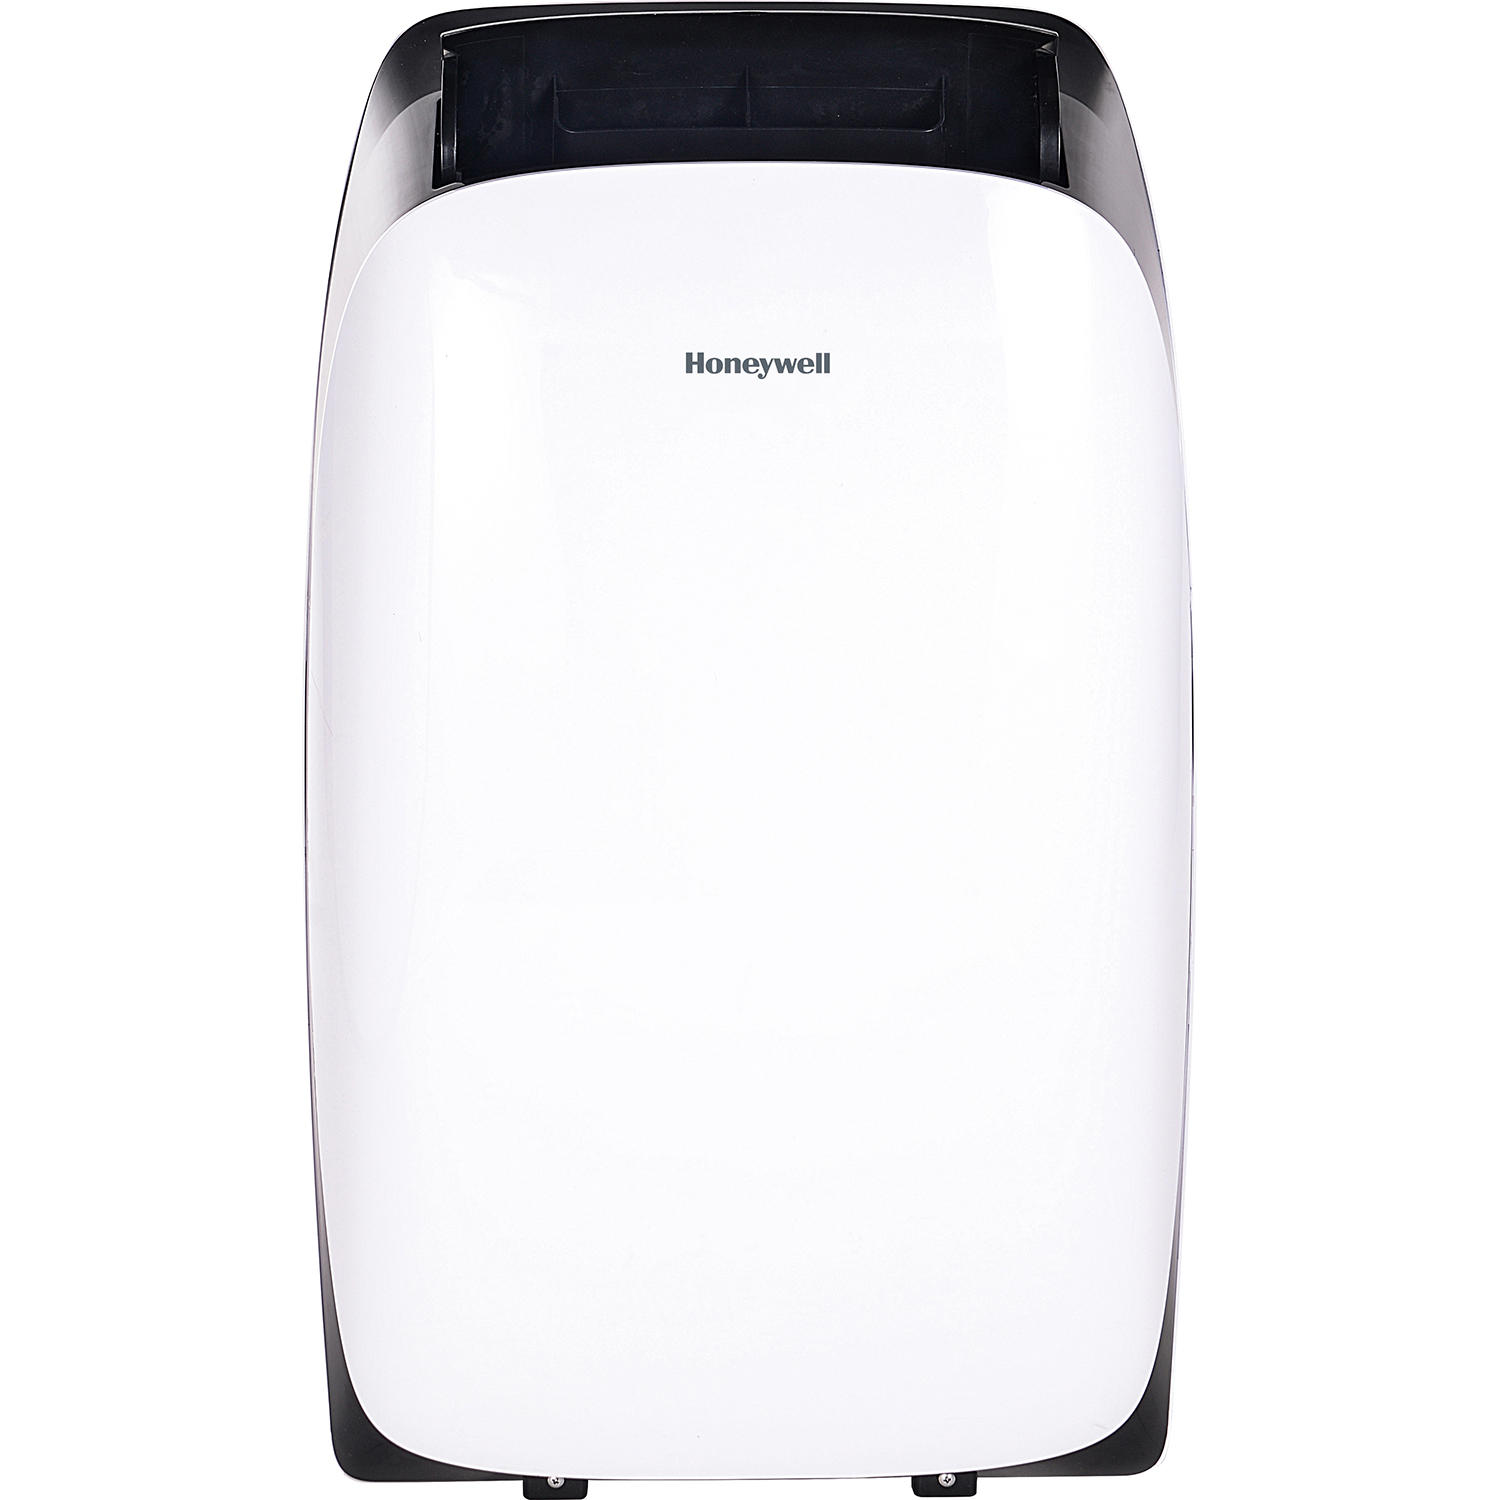 Honeywell HL10CESWK Series 10,000 BTU Portable Air Conditioner with Remote Control